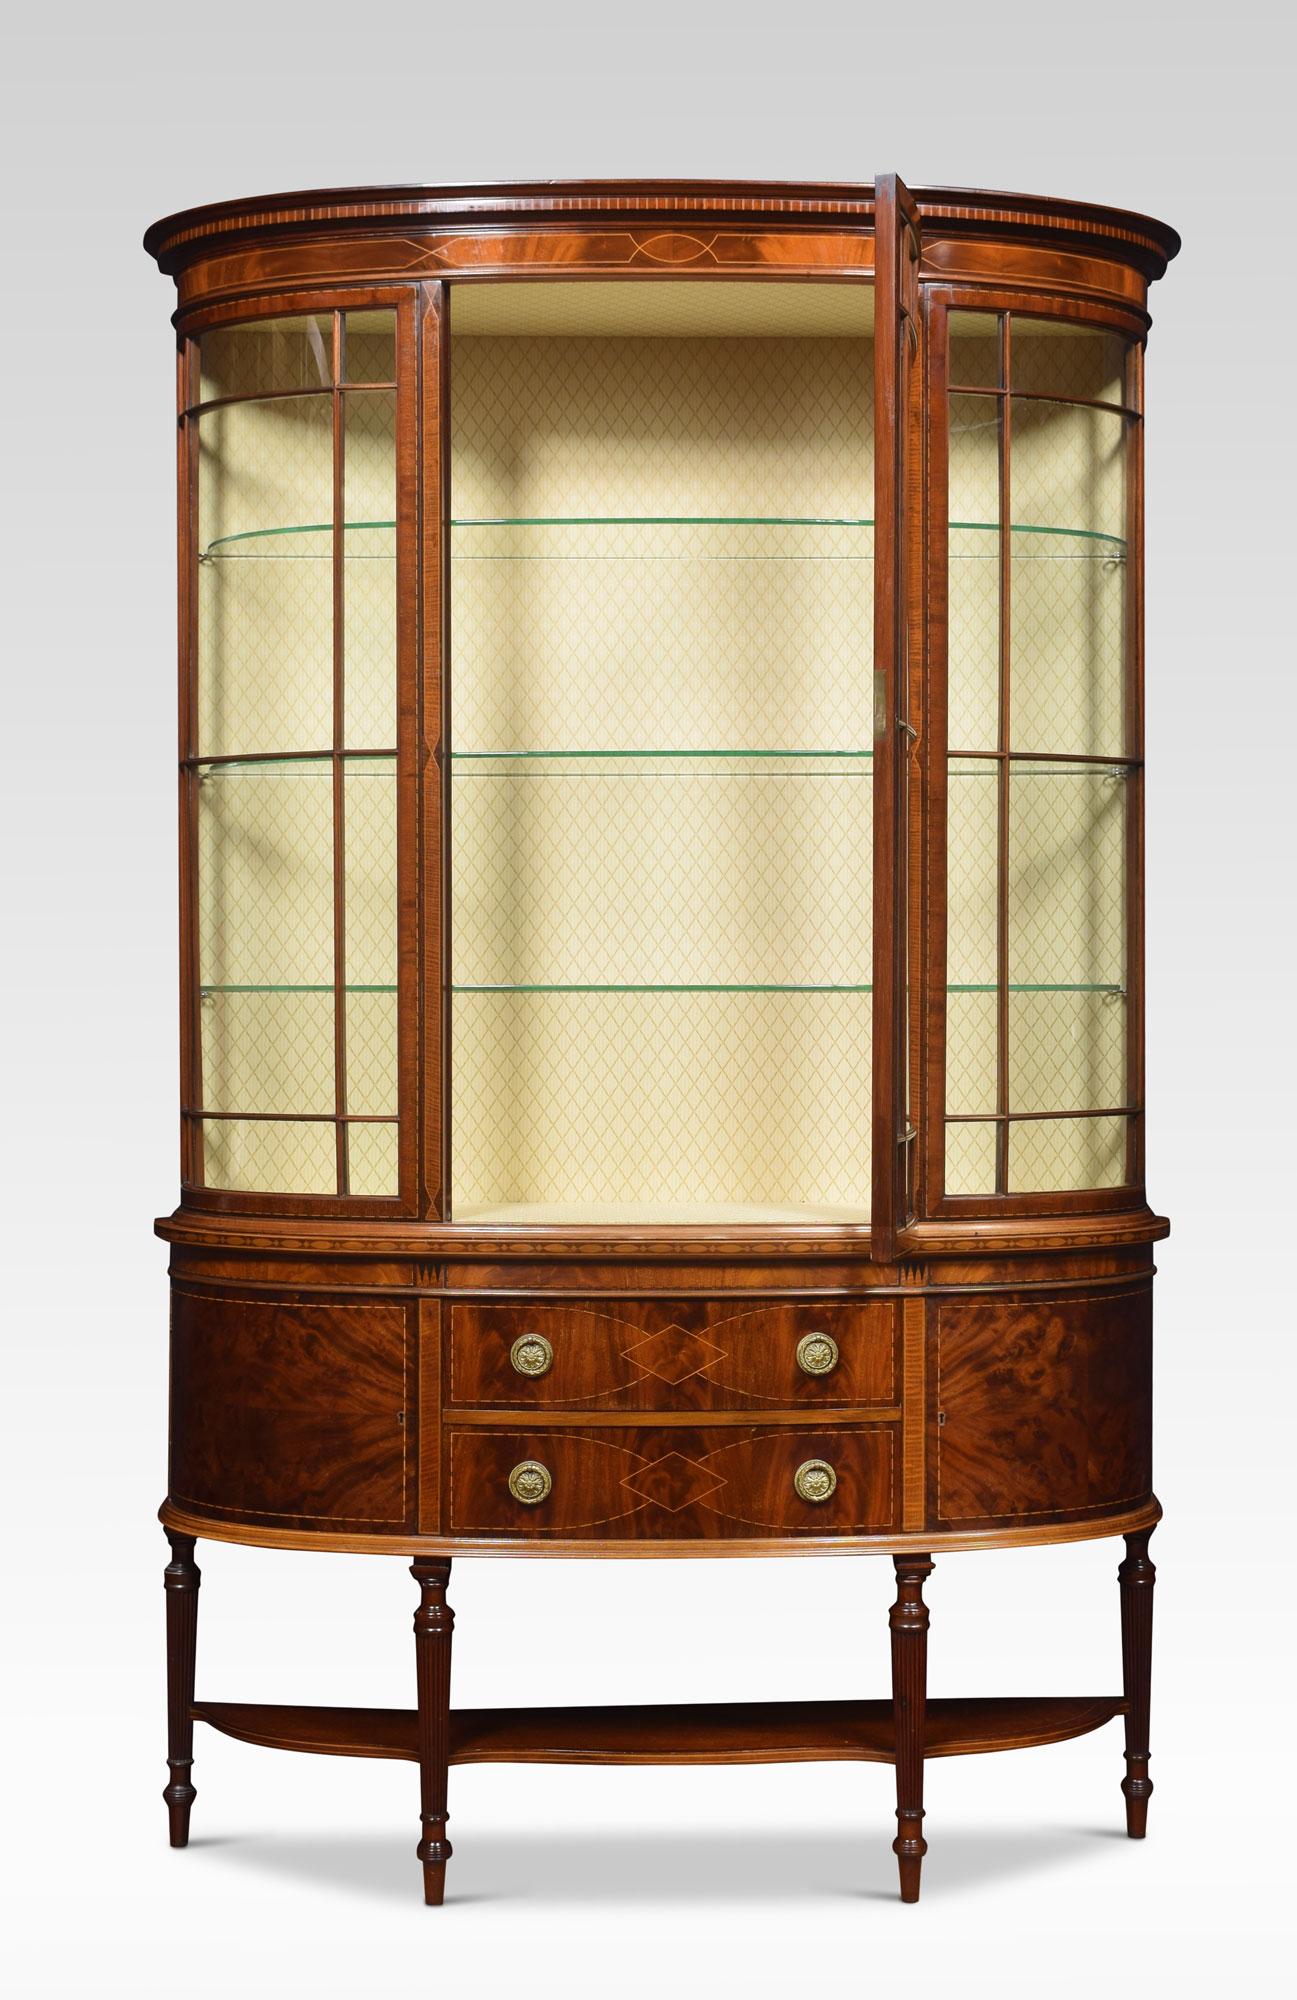 Mahogany bow fronted display cabinet the moulded cornice above large central single door opening to reveal the upholstered interior and three glazed shelves. The base section fitted with two central drawers having tooled brass handles flanked by